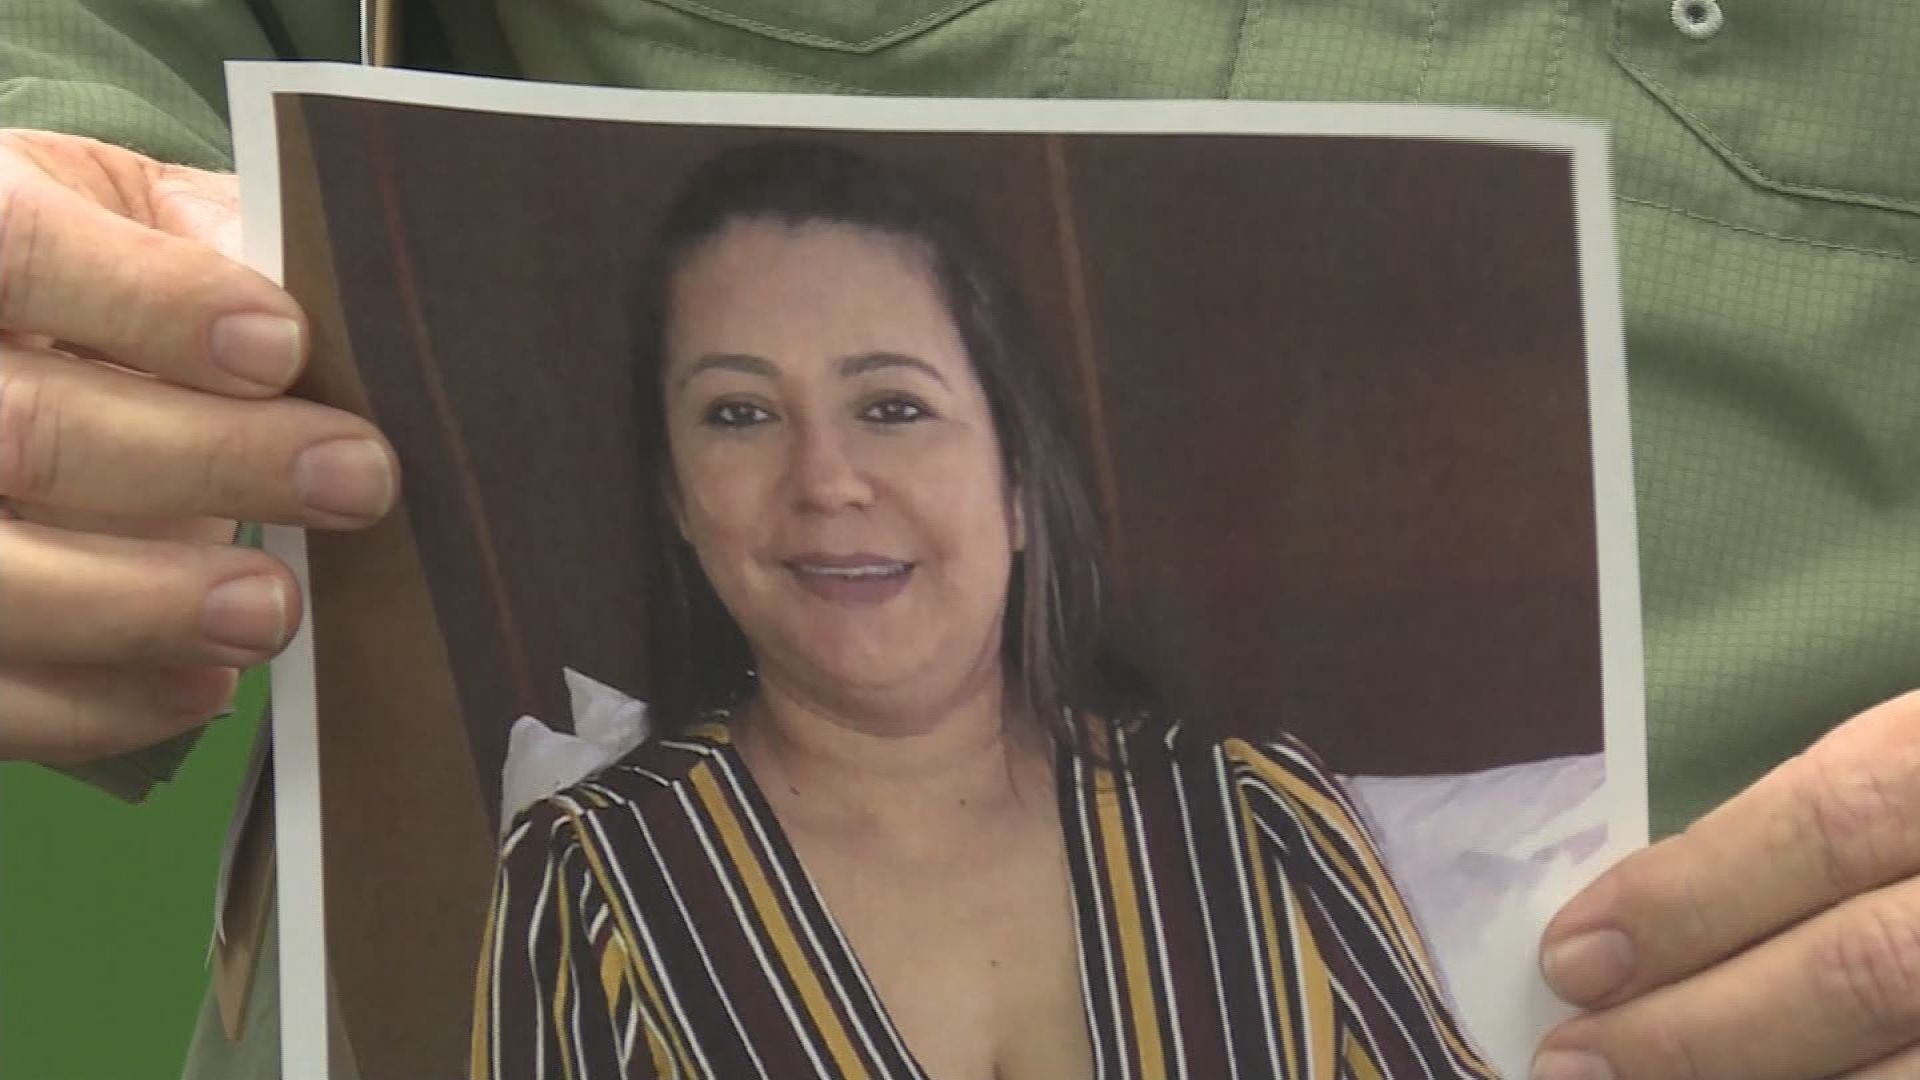 The family of Ana Piñon-Williams, 38, says her life "truly was a light in this world." Her brother-in-law identified her as one of the victims in the Sebring, Florida, SunTrust bank shooting.